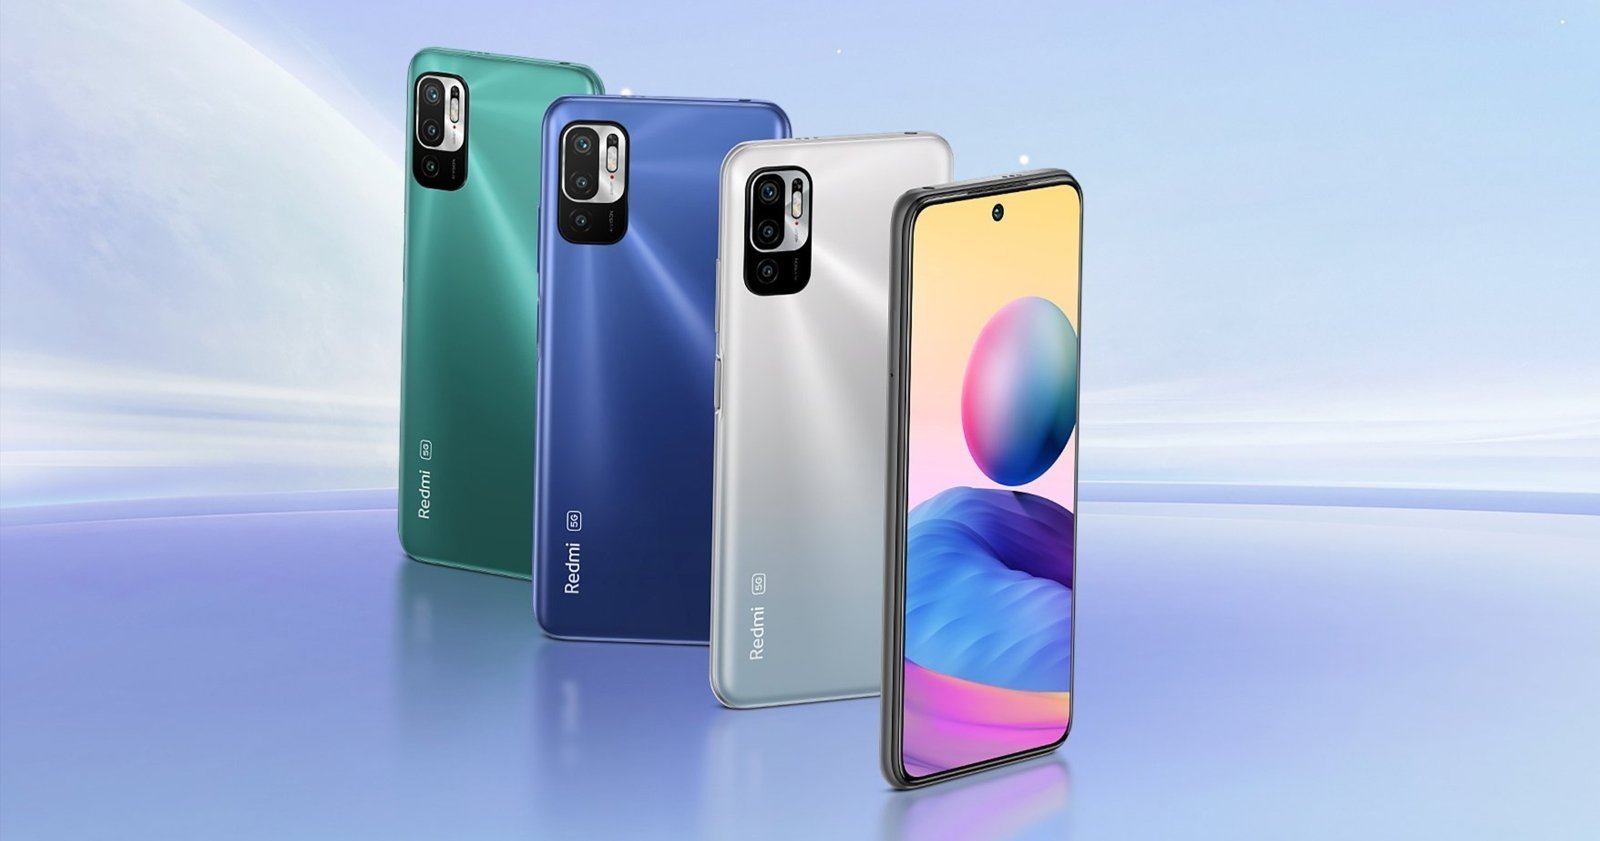 The Xiaomi Redmi Note 10 5G in various colors